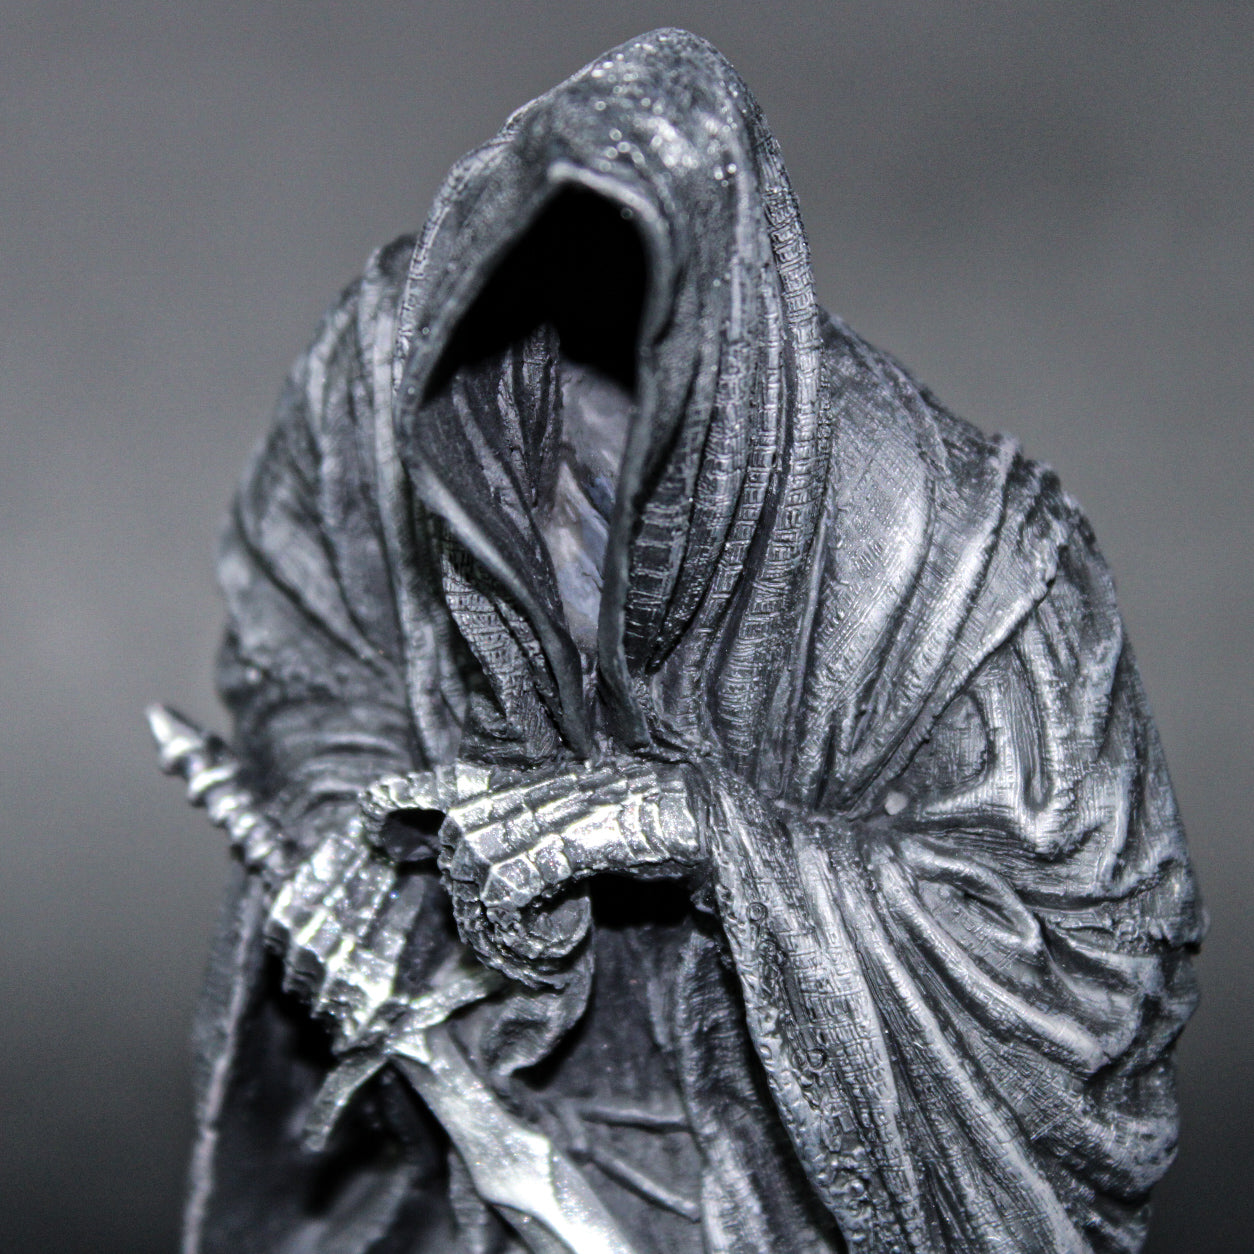 Load image into Gallery viewer, Ringwraith Lord of the Rings Mini Statue by Weta Workshop
